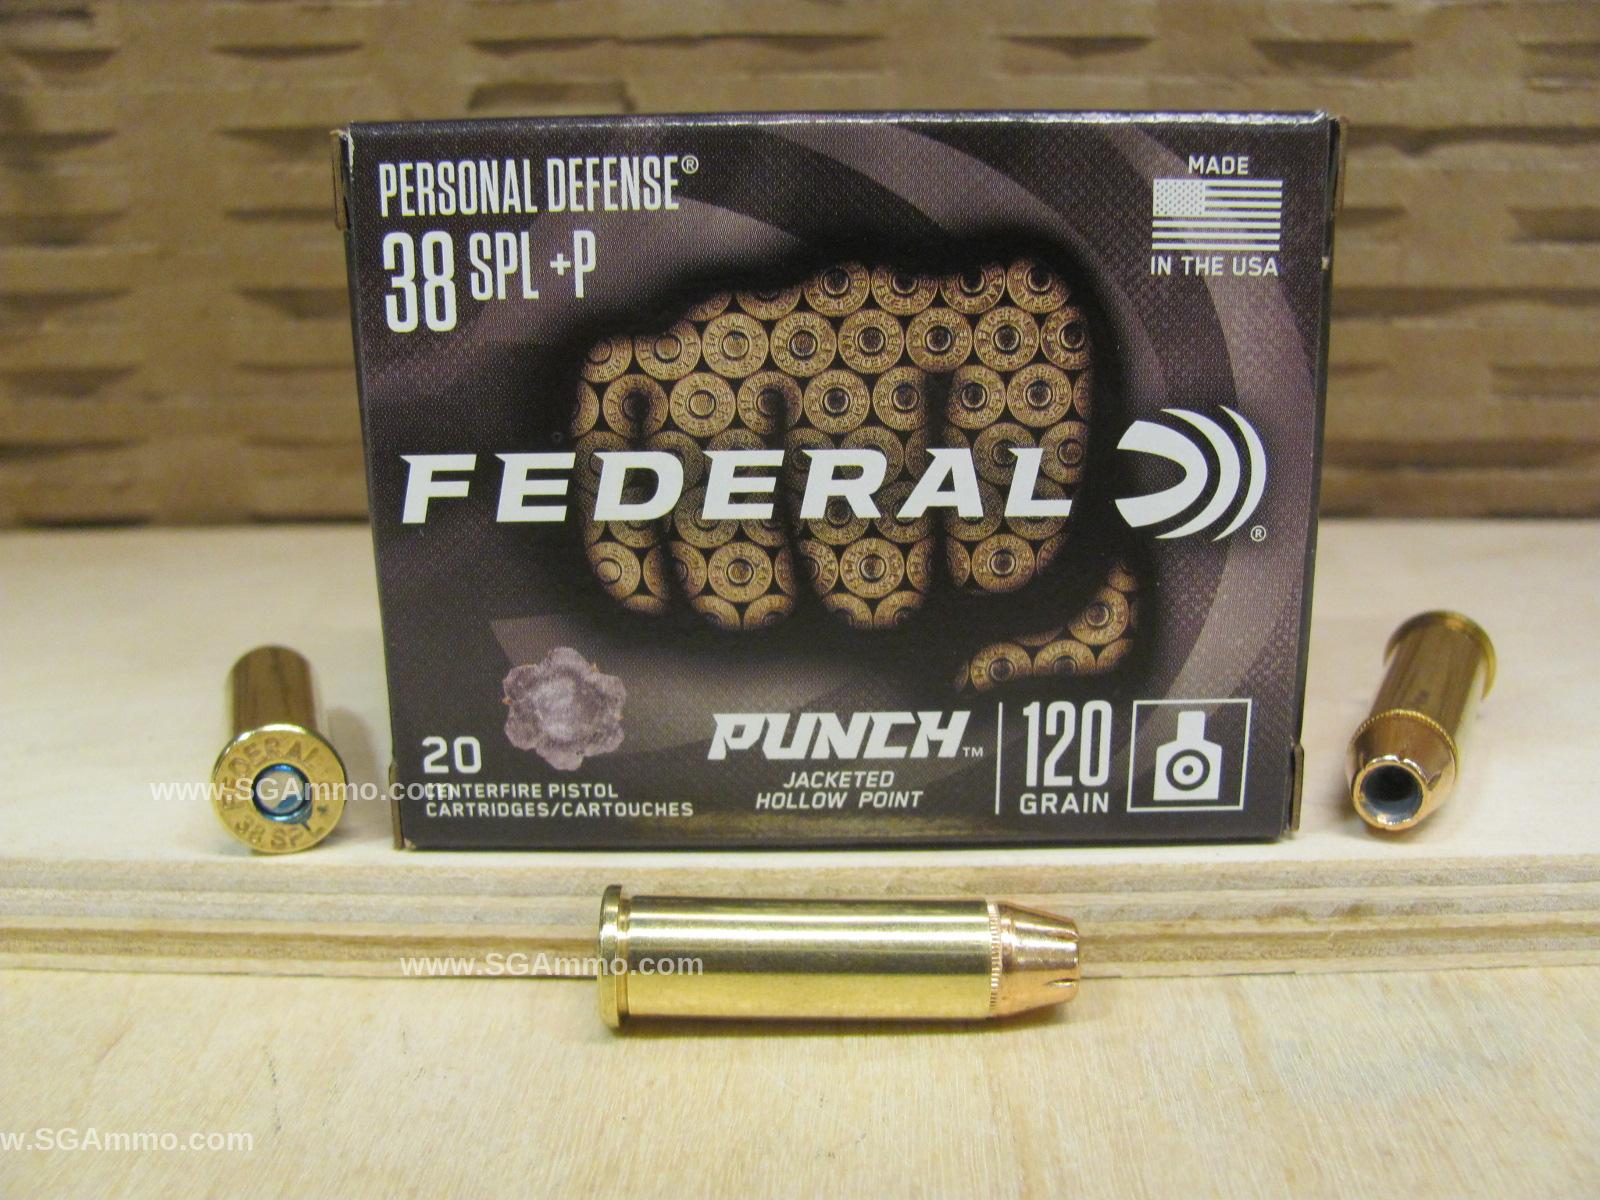 20 Round Box - 38 Special +P 120 Grain Punch Jacketed Hollow Point Federal Ammo - PD38P1